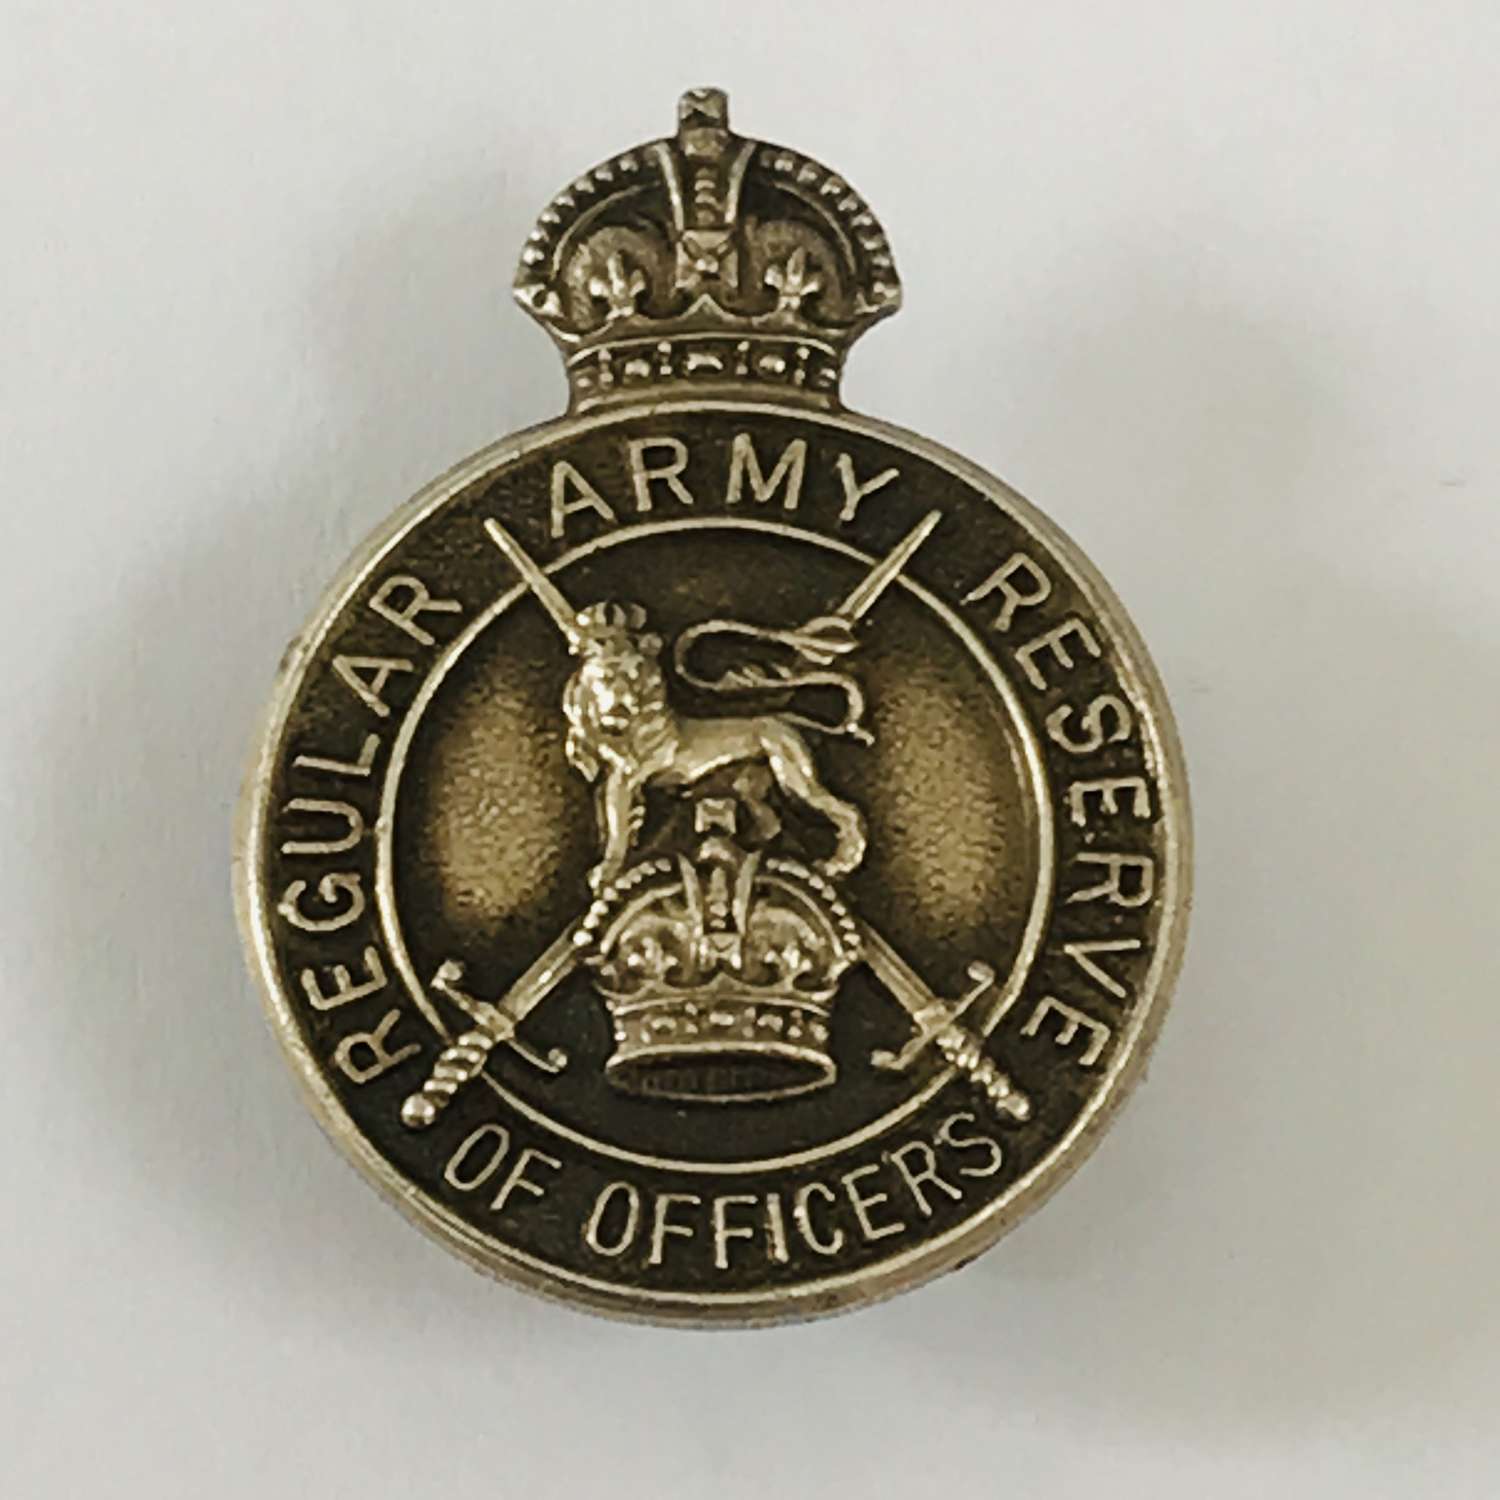 Regular Army reserves of officers badge dated 1939